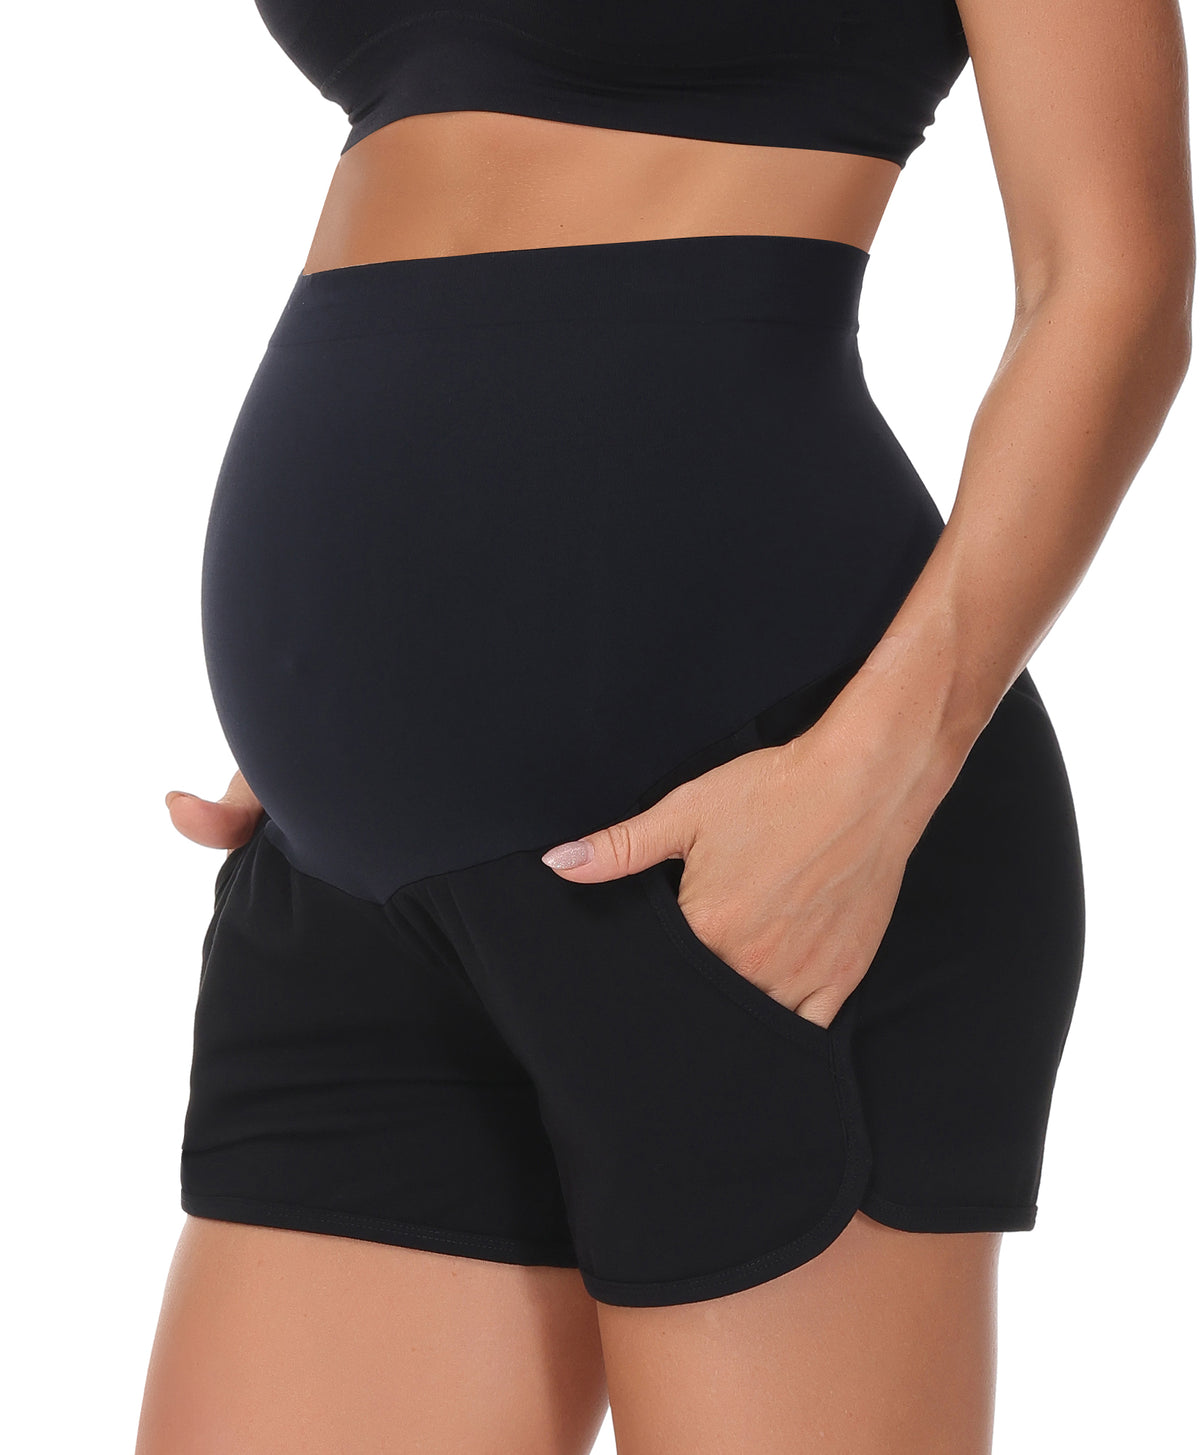 Over The Belly Pregnancy Support Cotton Maternity Shorts Black